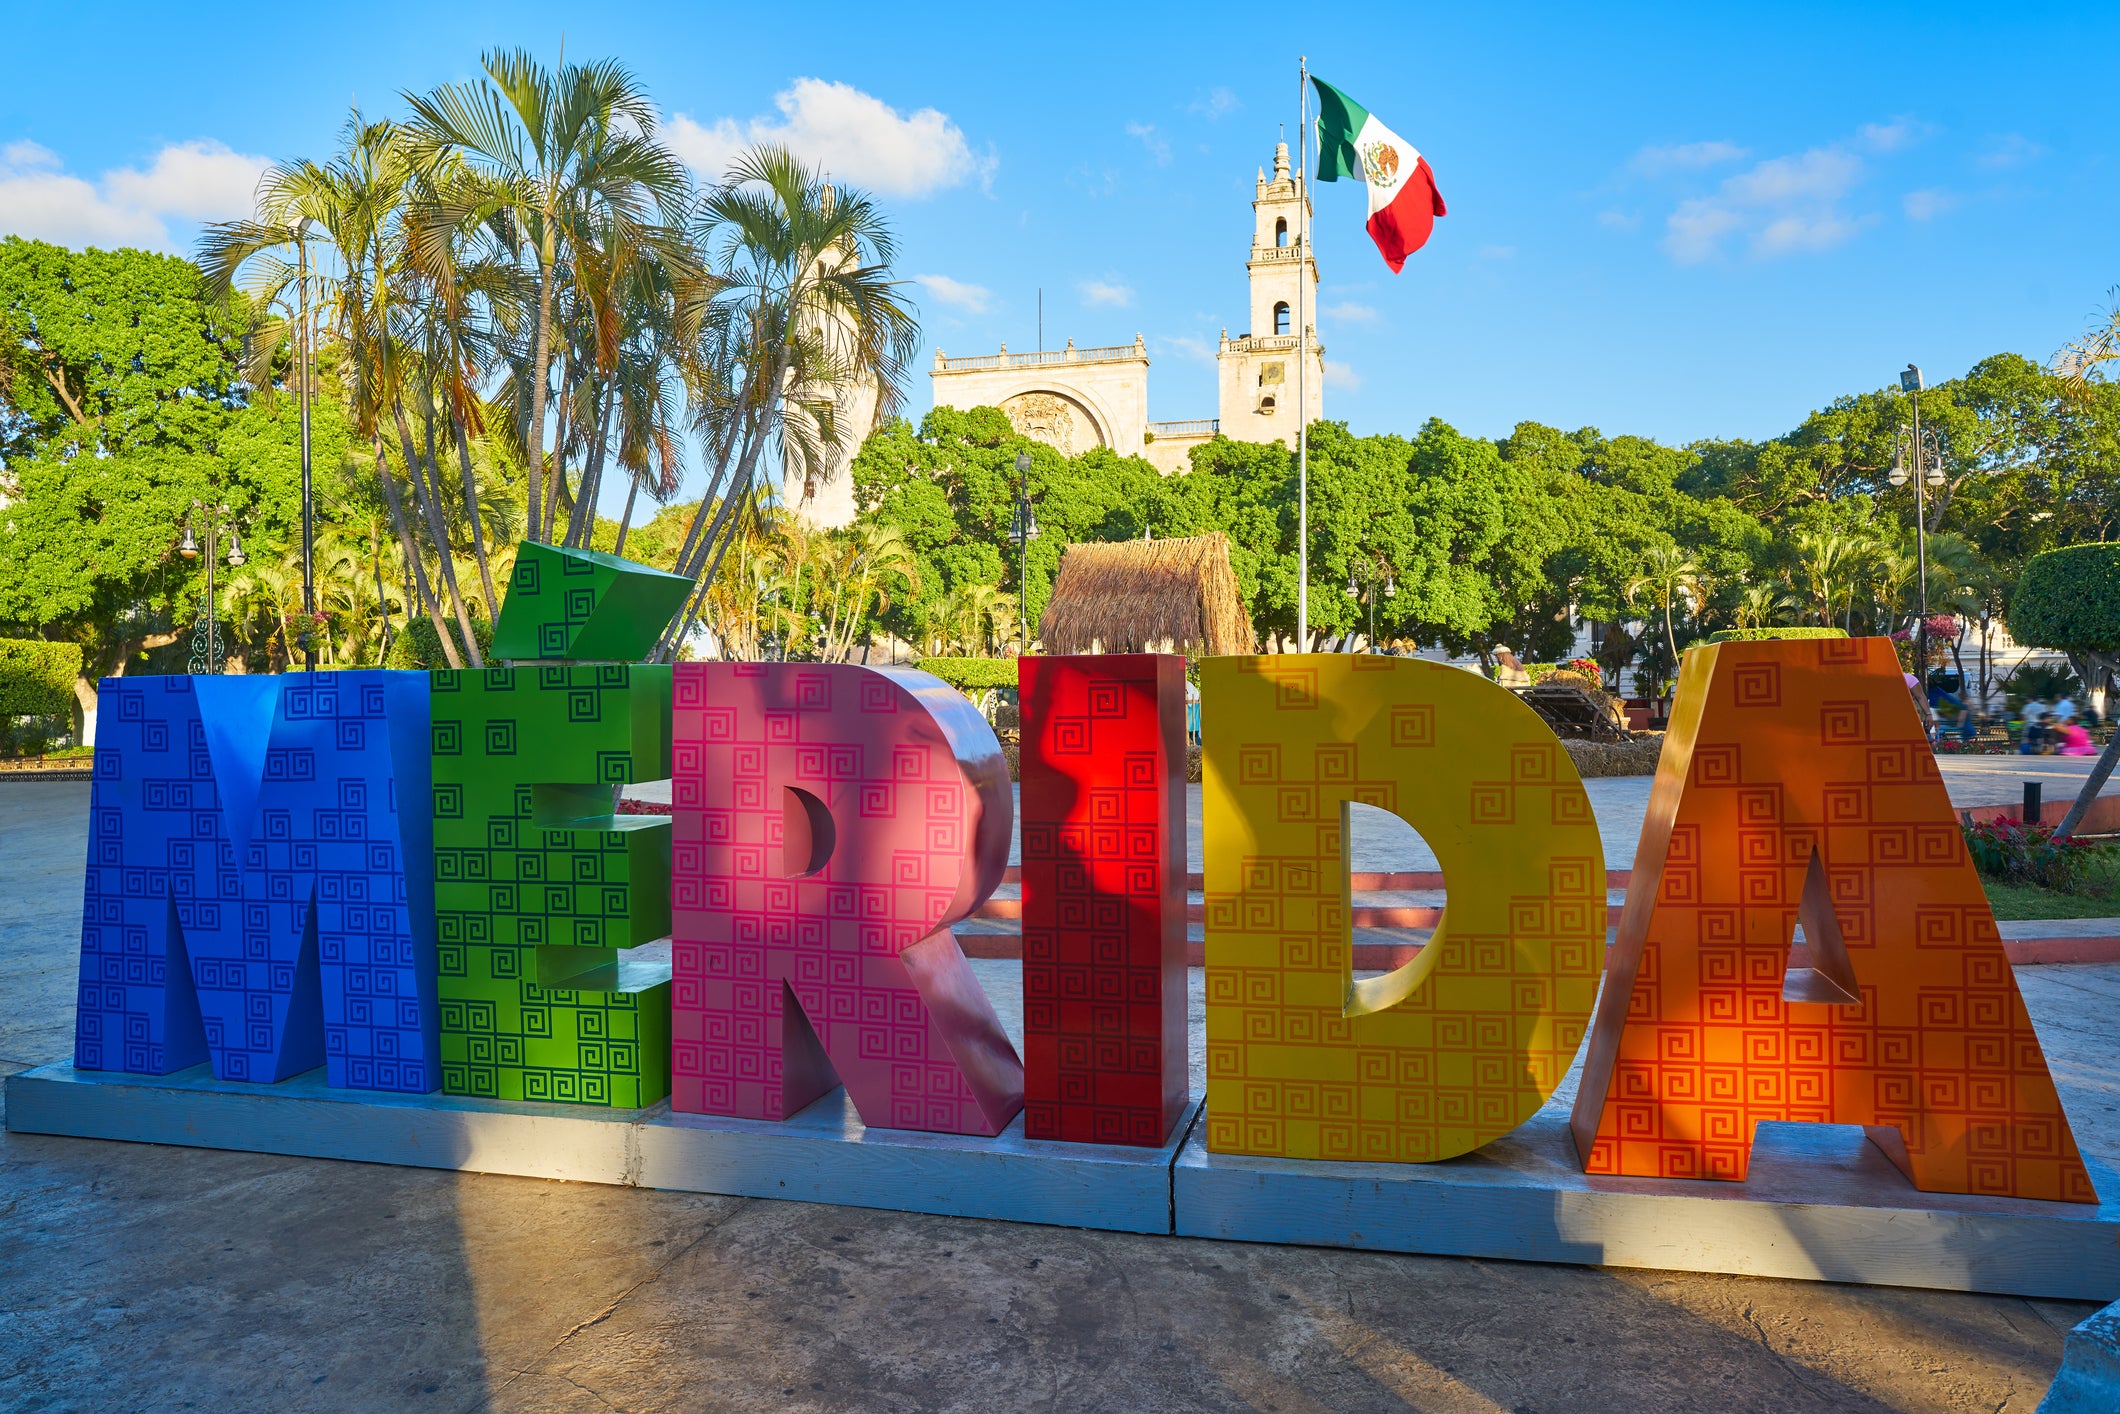 Merida is a place to feast on authentic Mayan cuisine